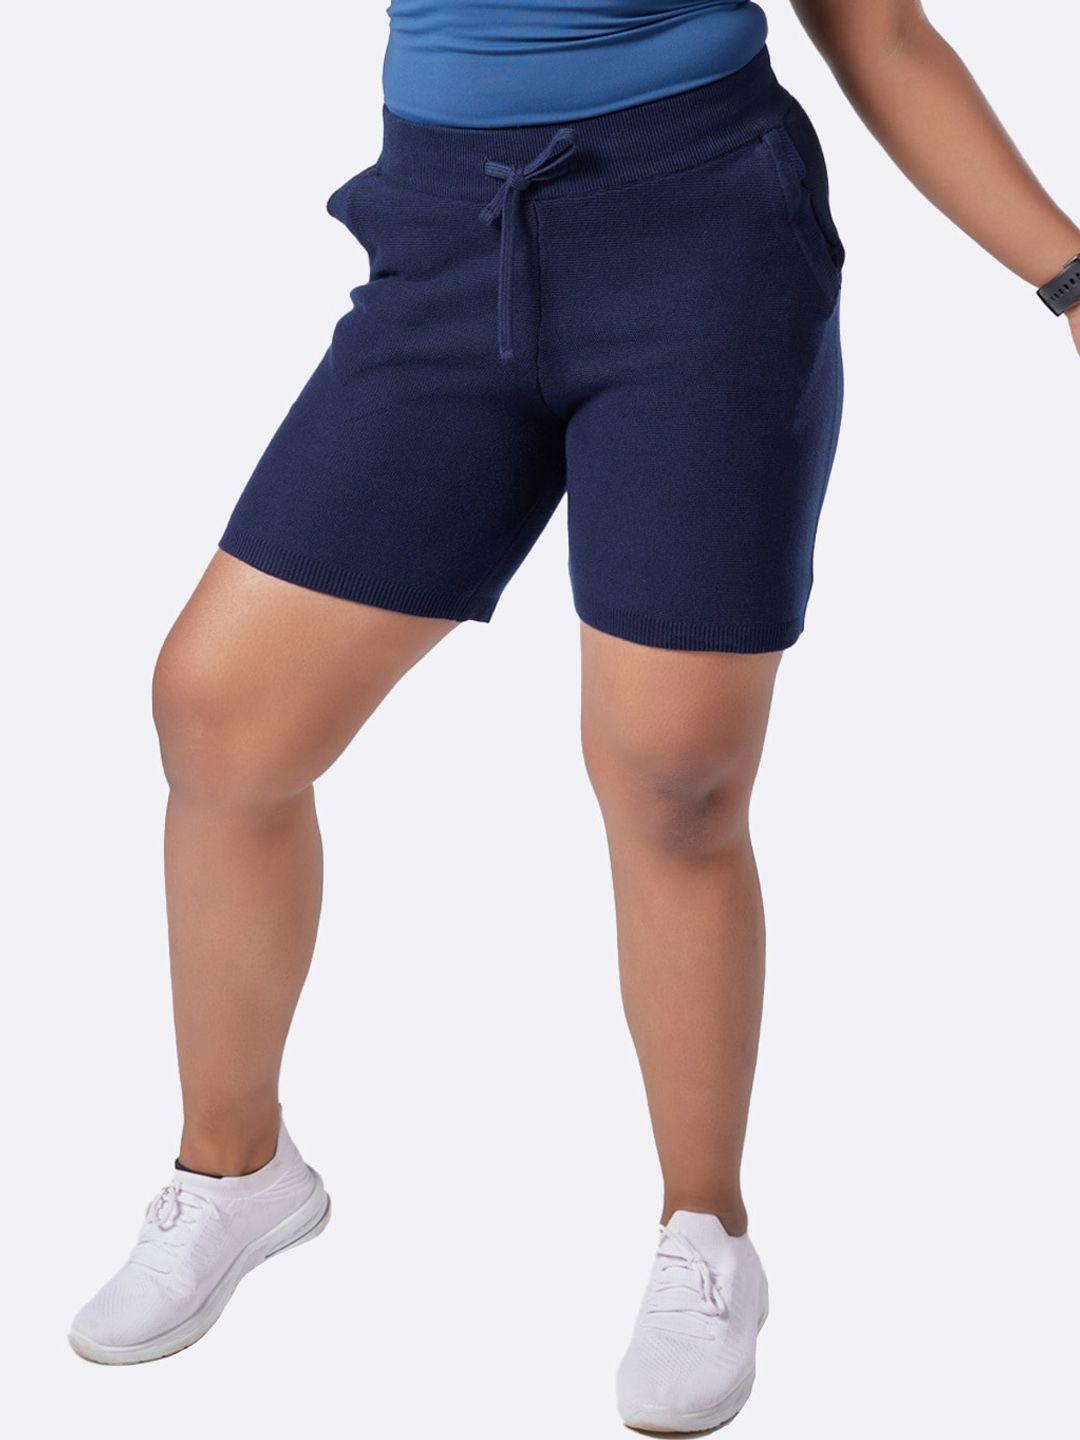 blissclub-women-navy-move-all-day-shorts-with-2-deep-side-pocket